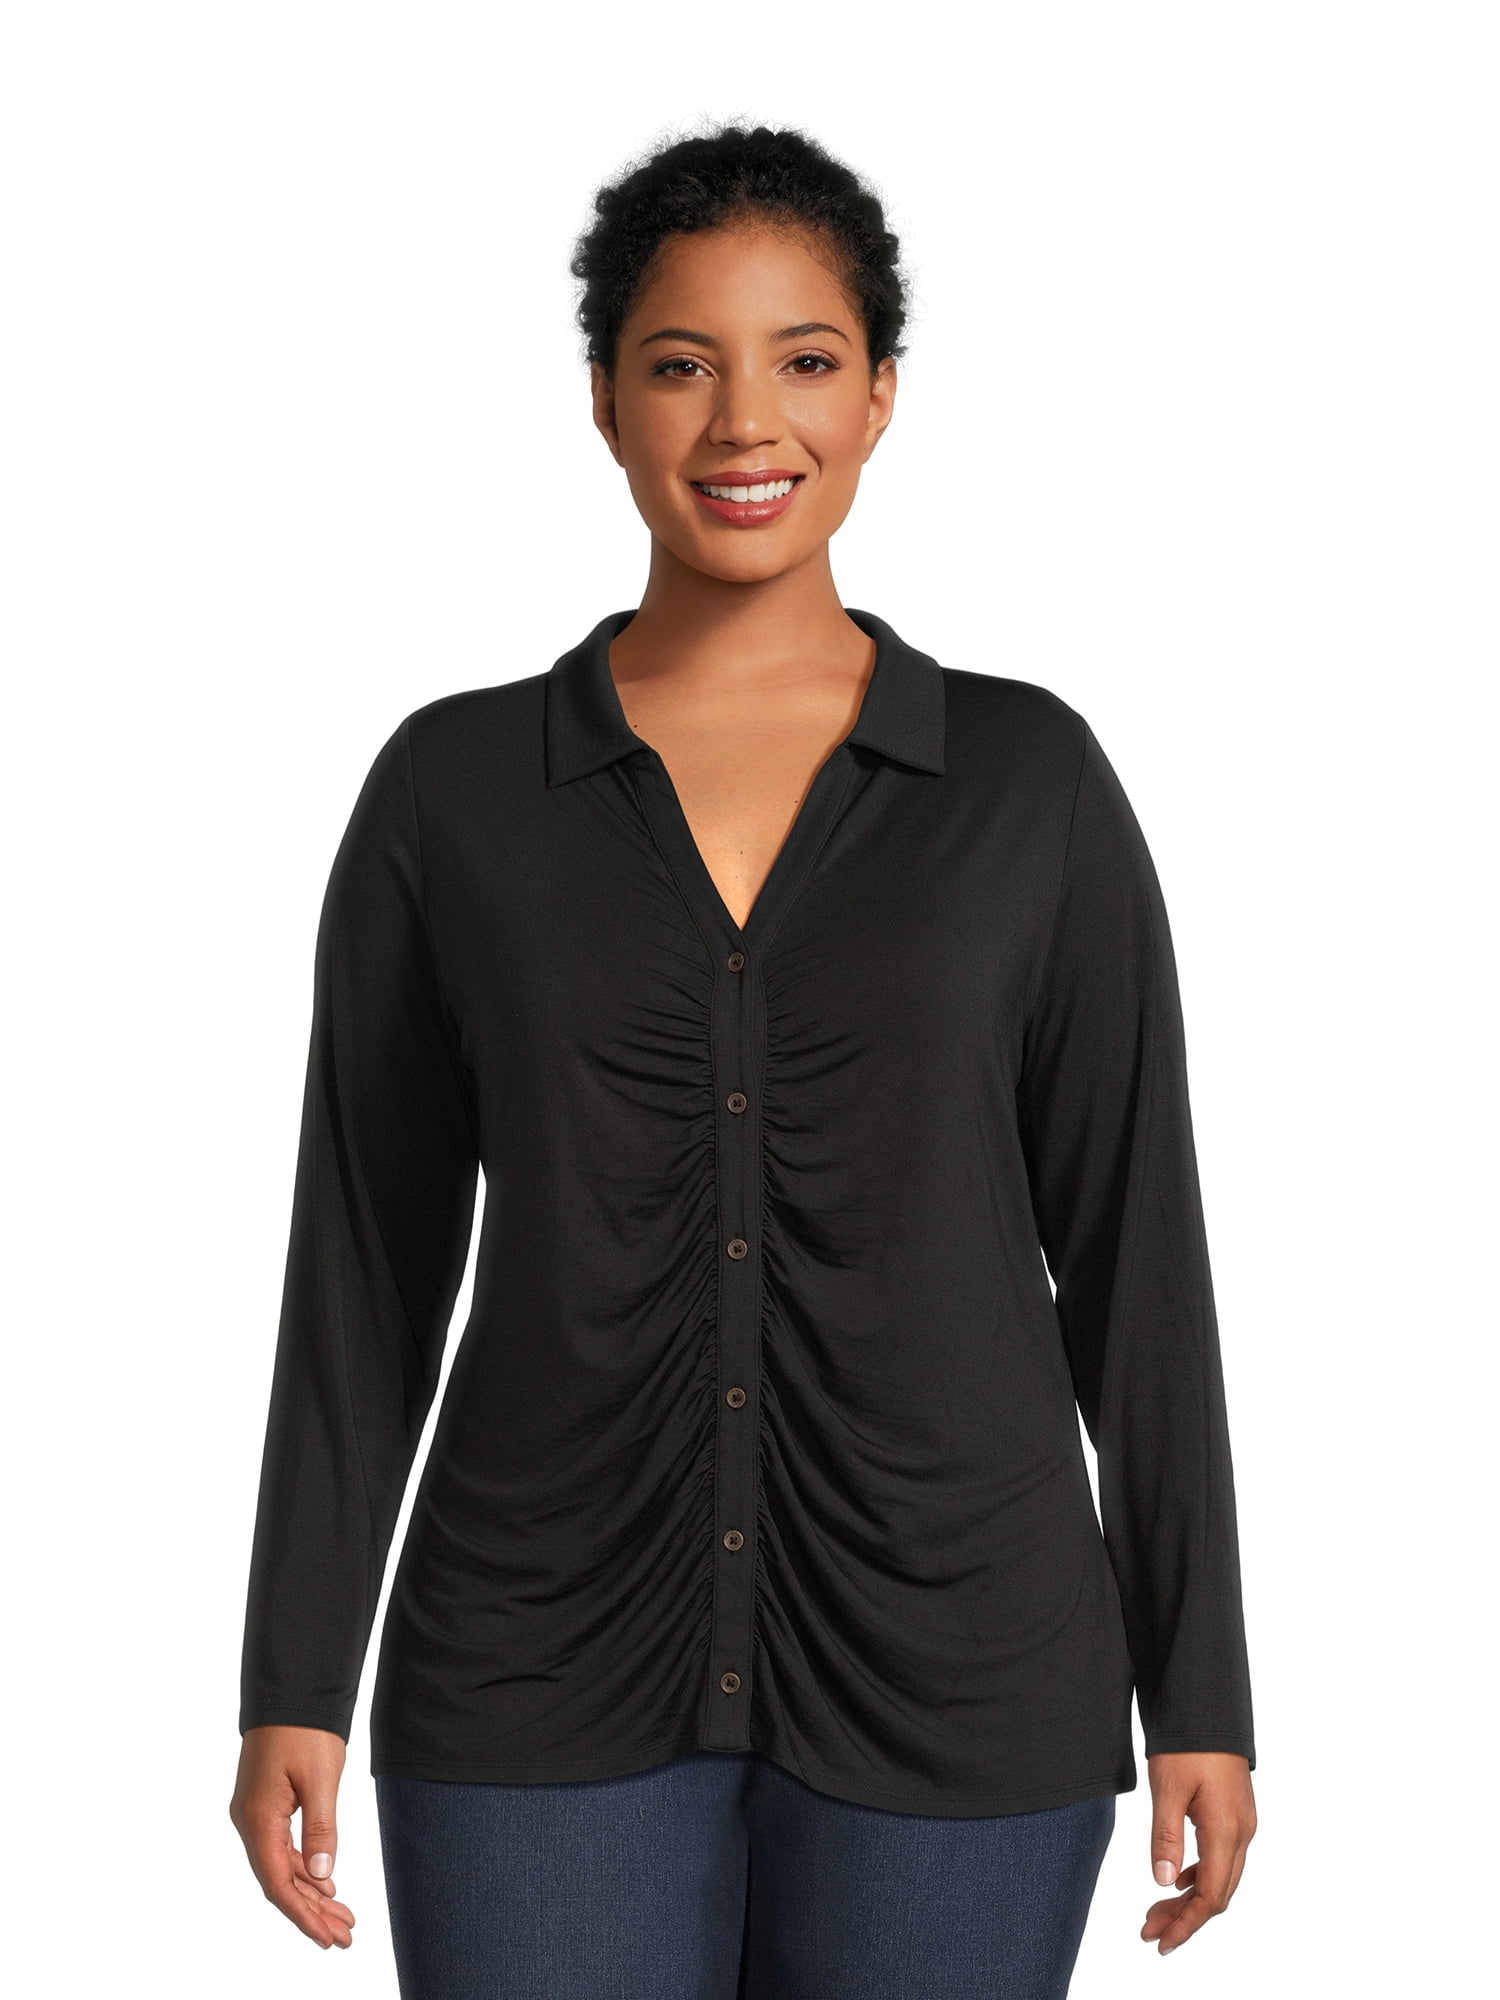 Terra & Sky Women's Plus Size Rouched Shirt with Long Sleeves - Walmart.com